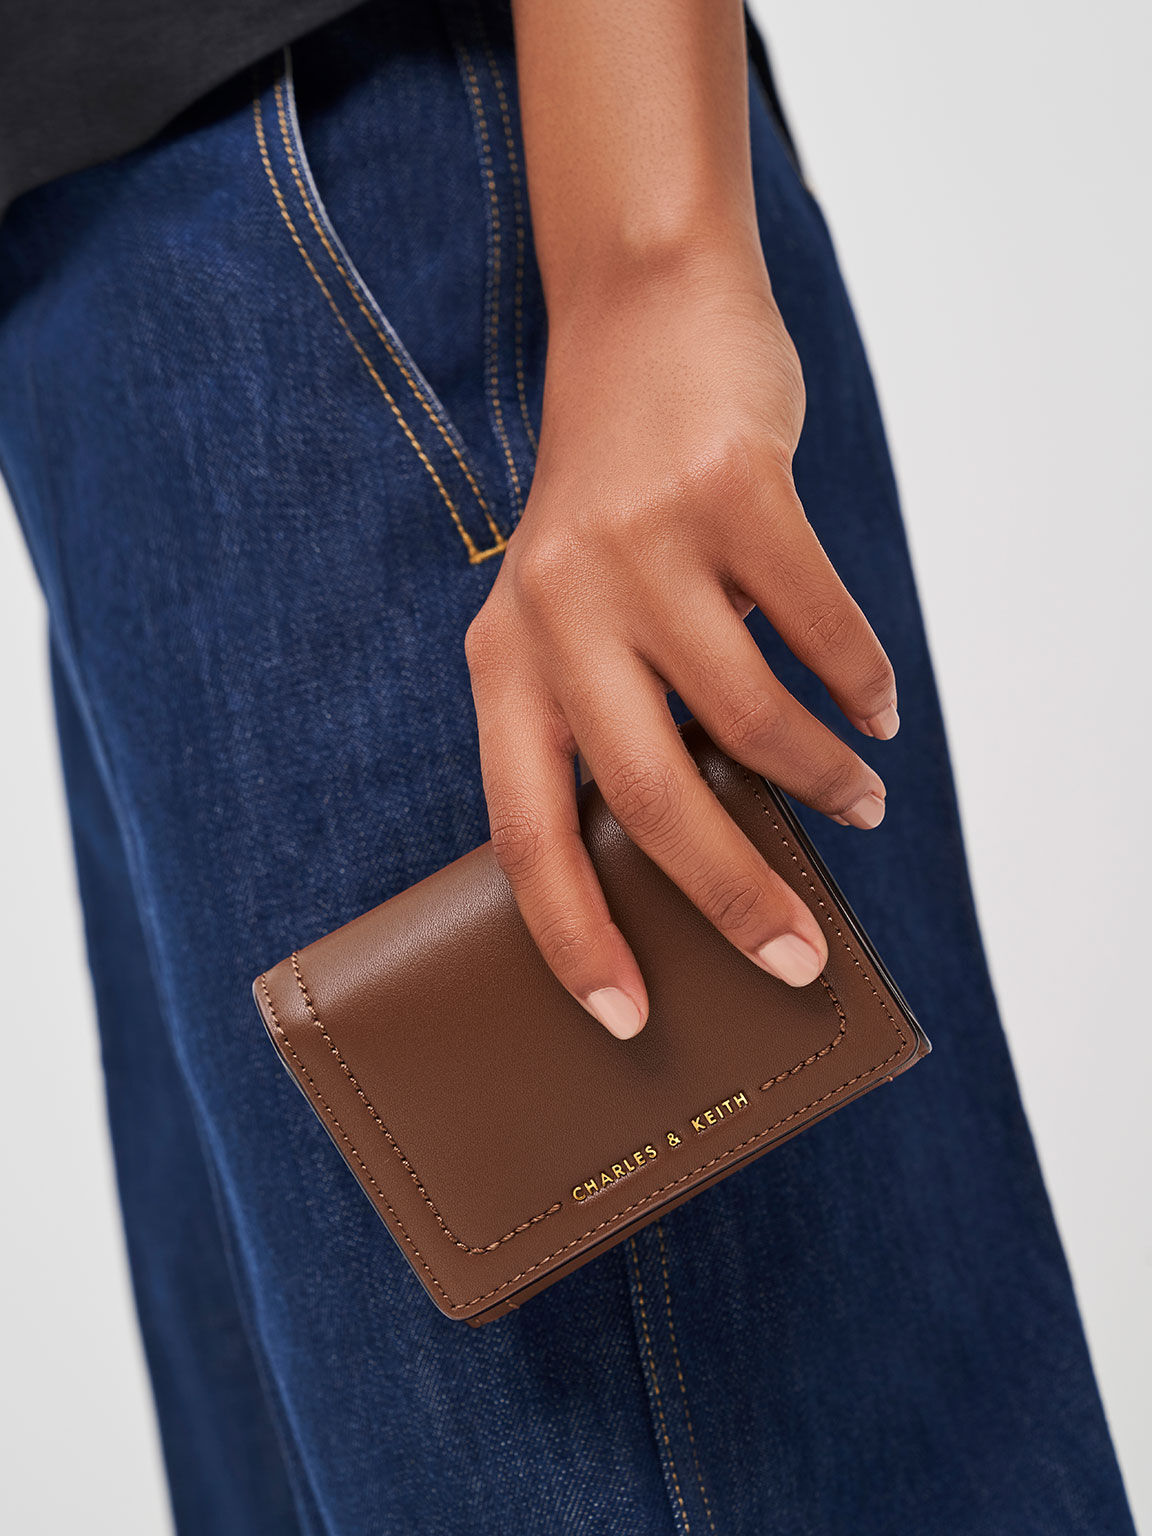 VÍ NỮ CHARLES KEITH SONNET SNAP BUTTON SMALL WALLET 19